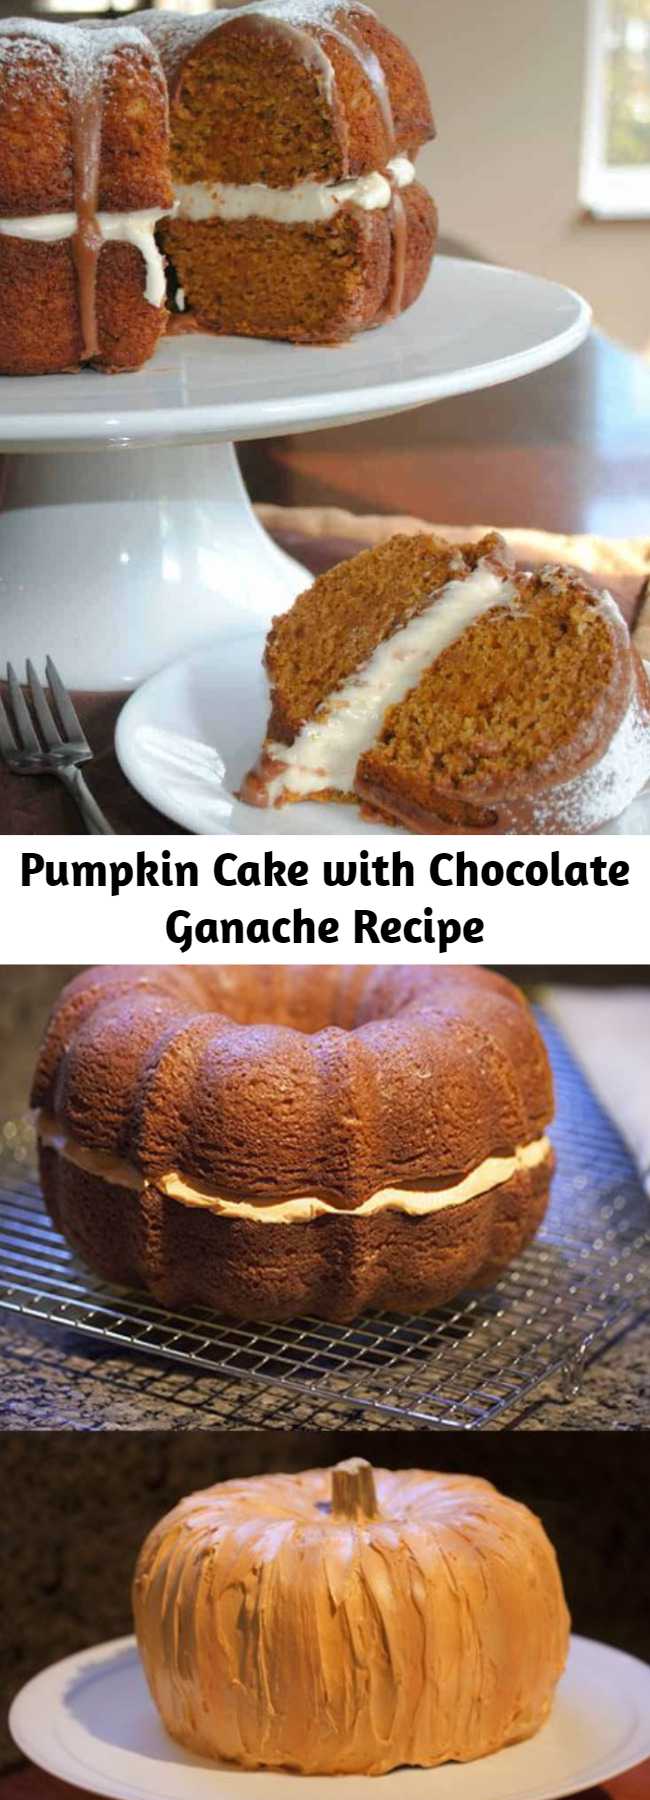 Pumpkin Cake with Chocolate Ganache Recipe - It’s so rich and moist! Paired with the cream cheese frosting and chocolate ganache, you just can’t go wrong. So go do something right and have a slice of cake!!! Enjoy!